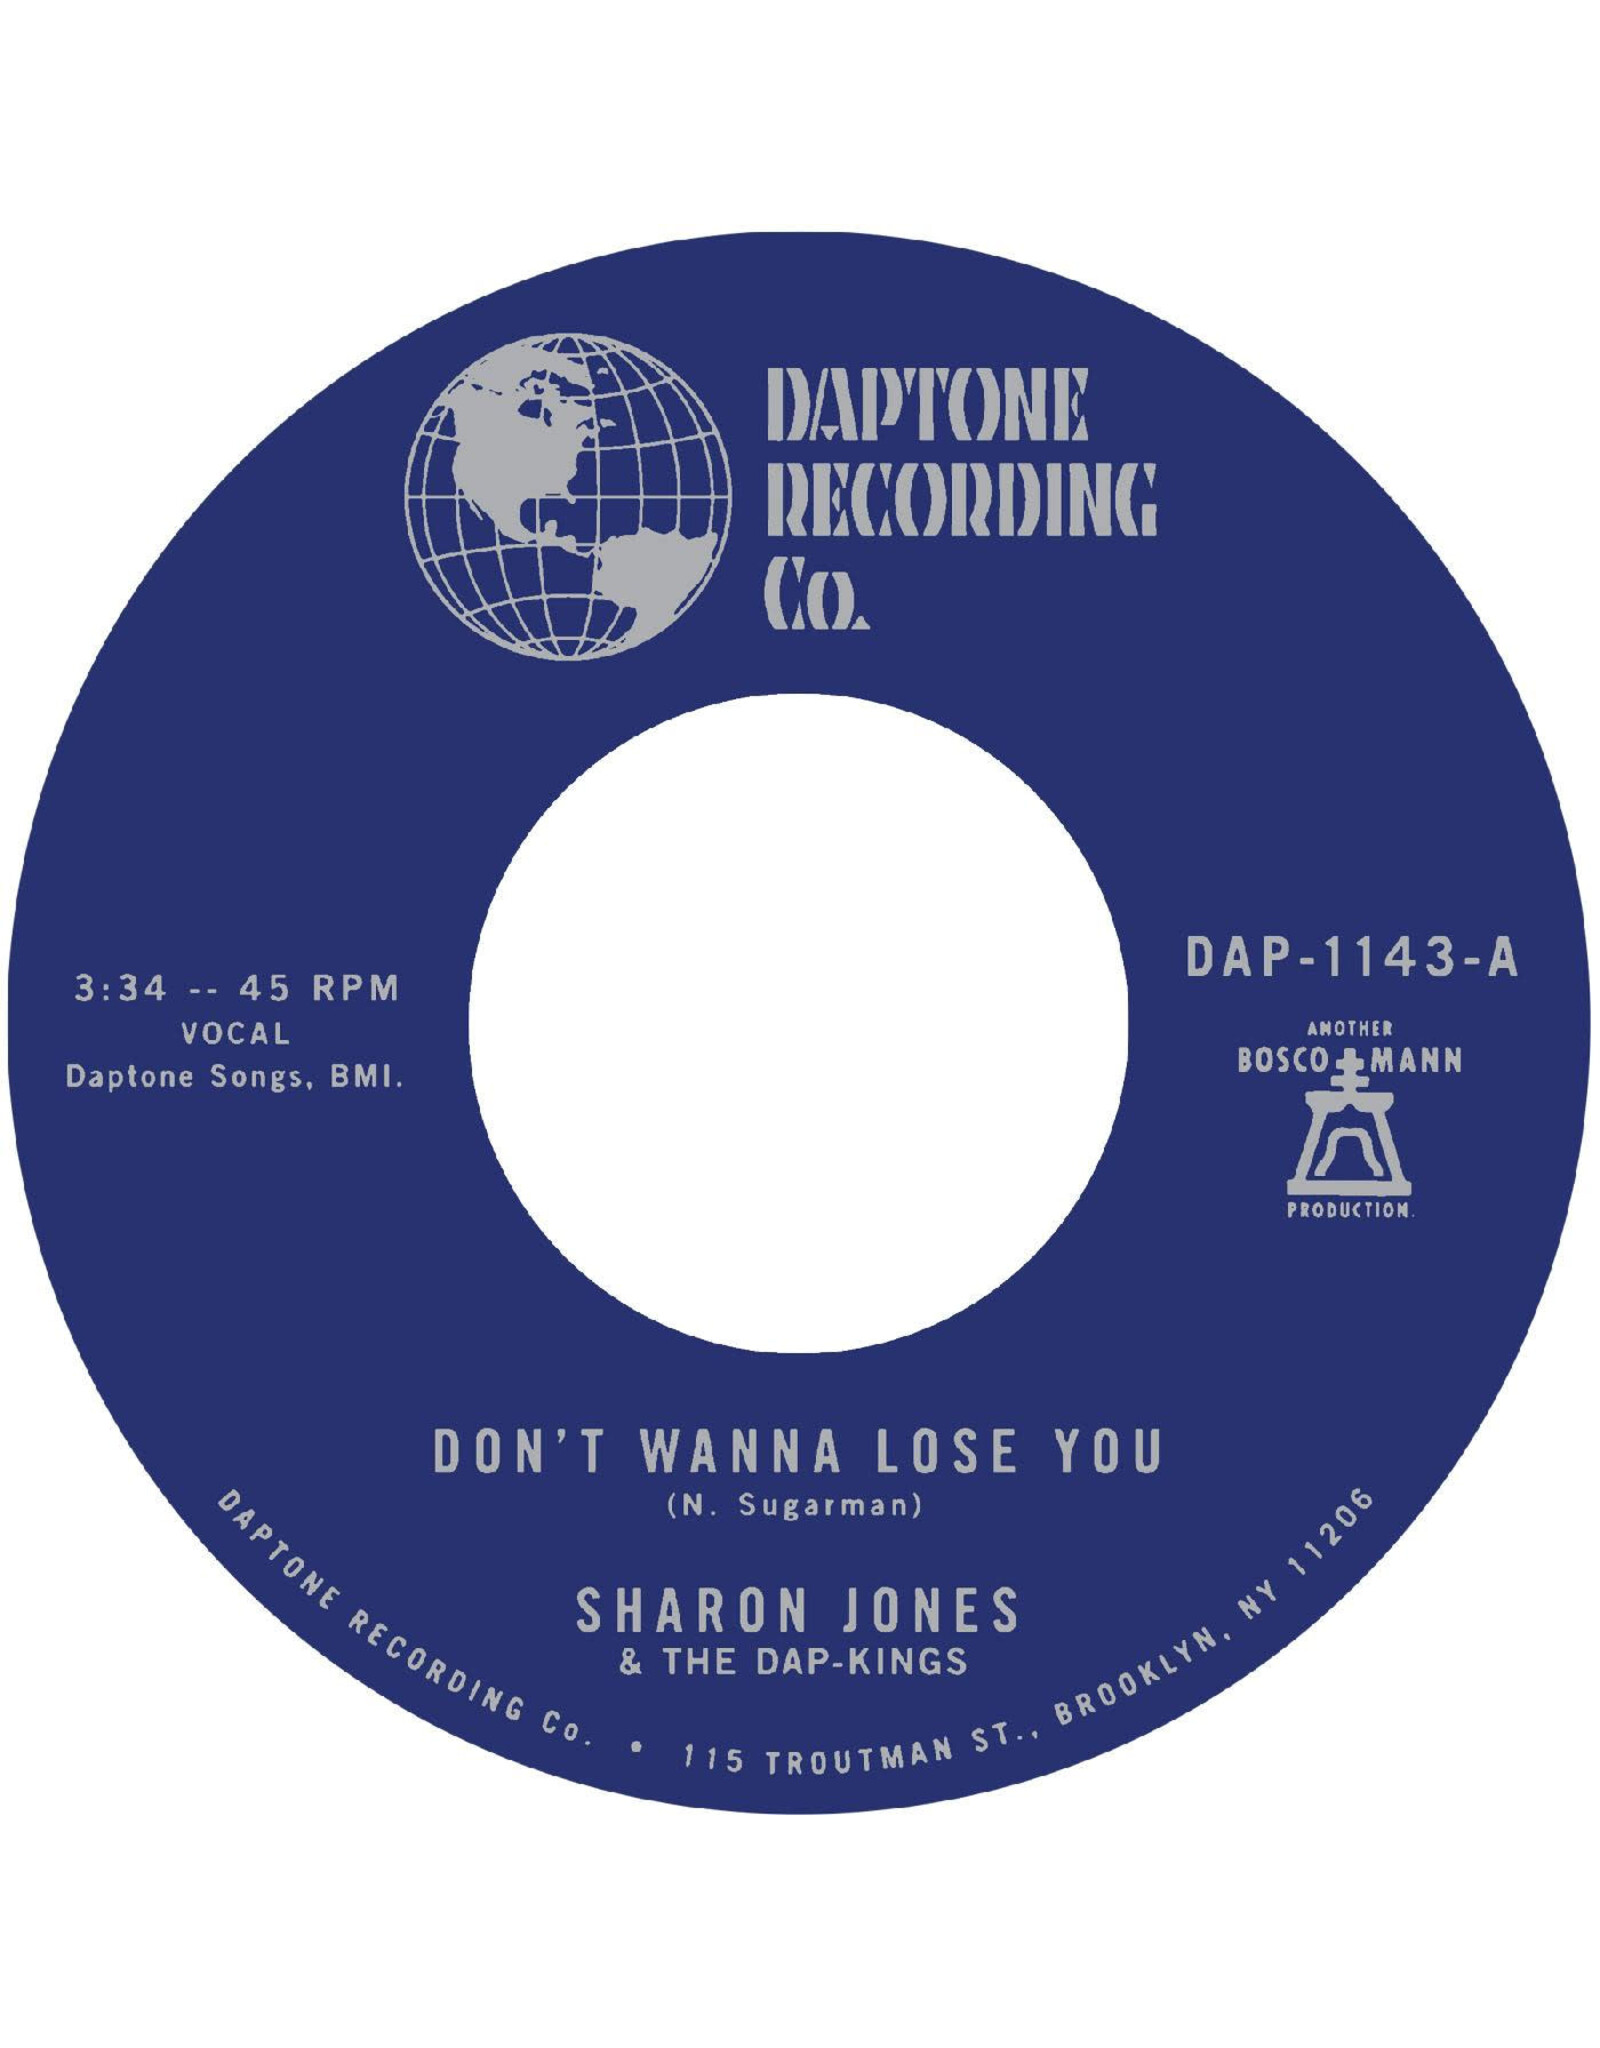 Daptone Jones, Sharon & The Dap-Kings: Don't Want To Lose You b/w Don't Give a Friend a Number LP